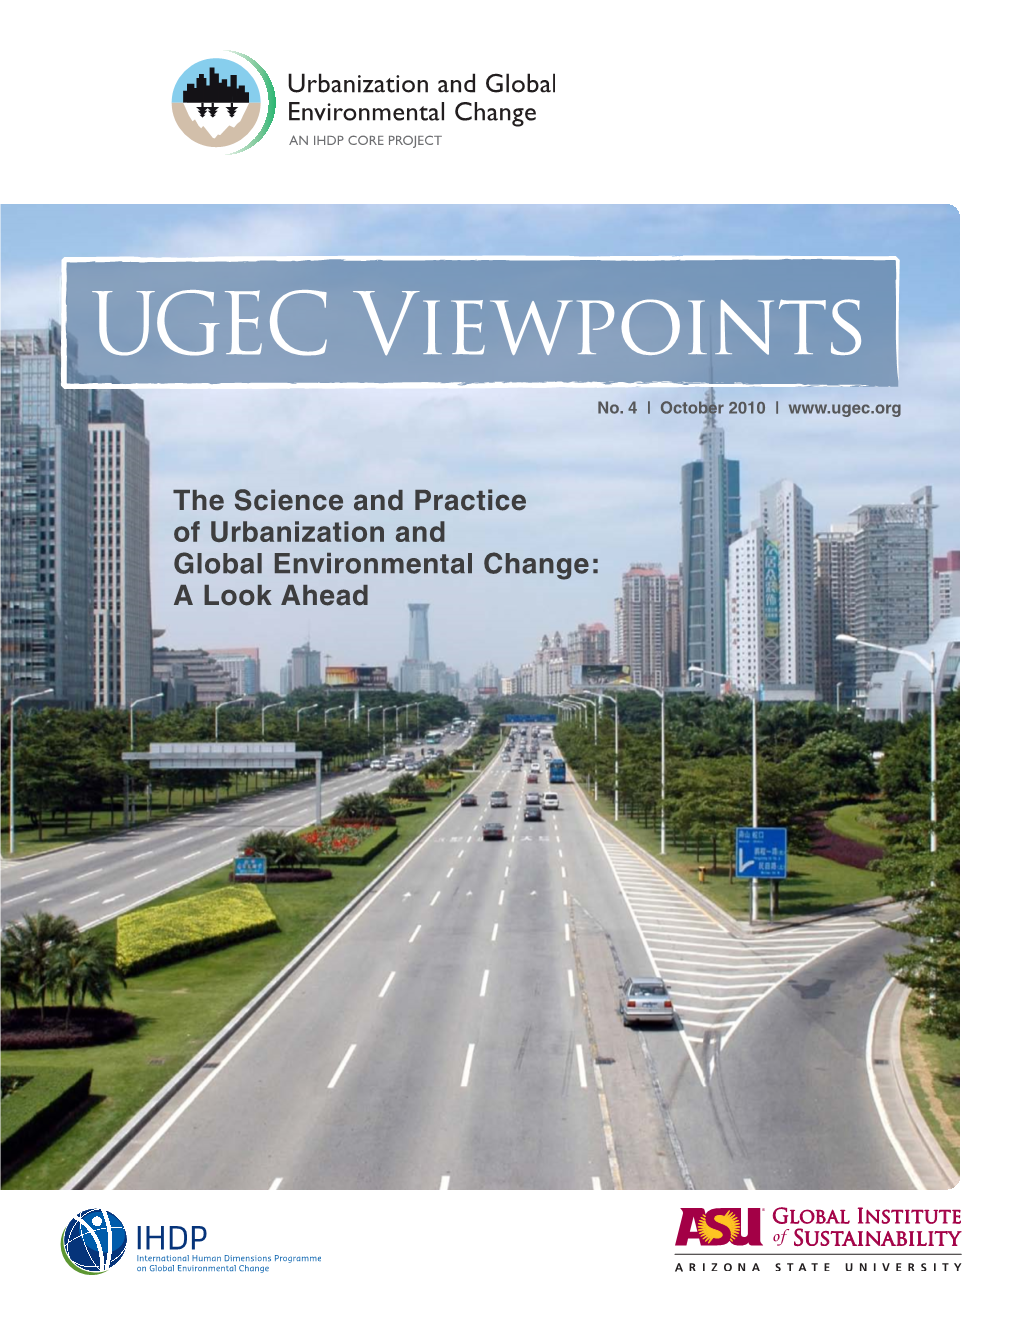 The Science and Practice of Urbanization and Global Environmental Change: a Look Ahead UGEC Viewpoints | No